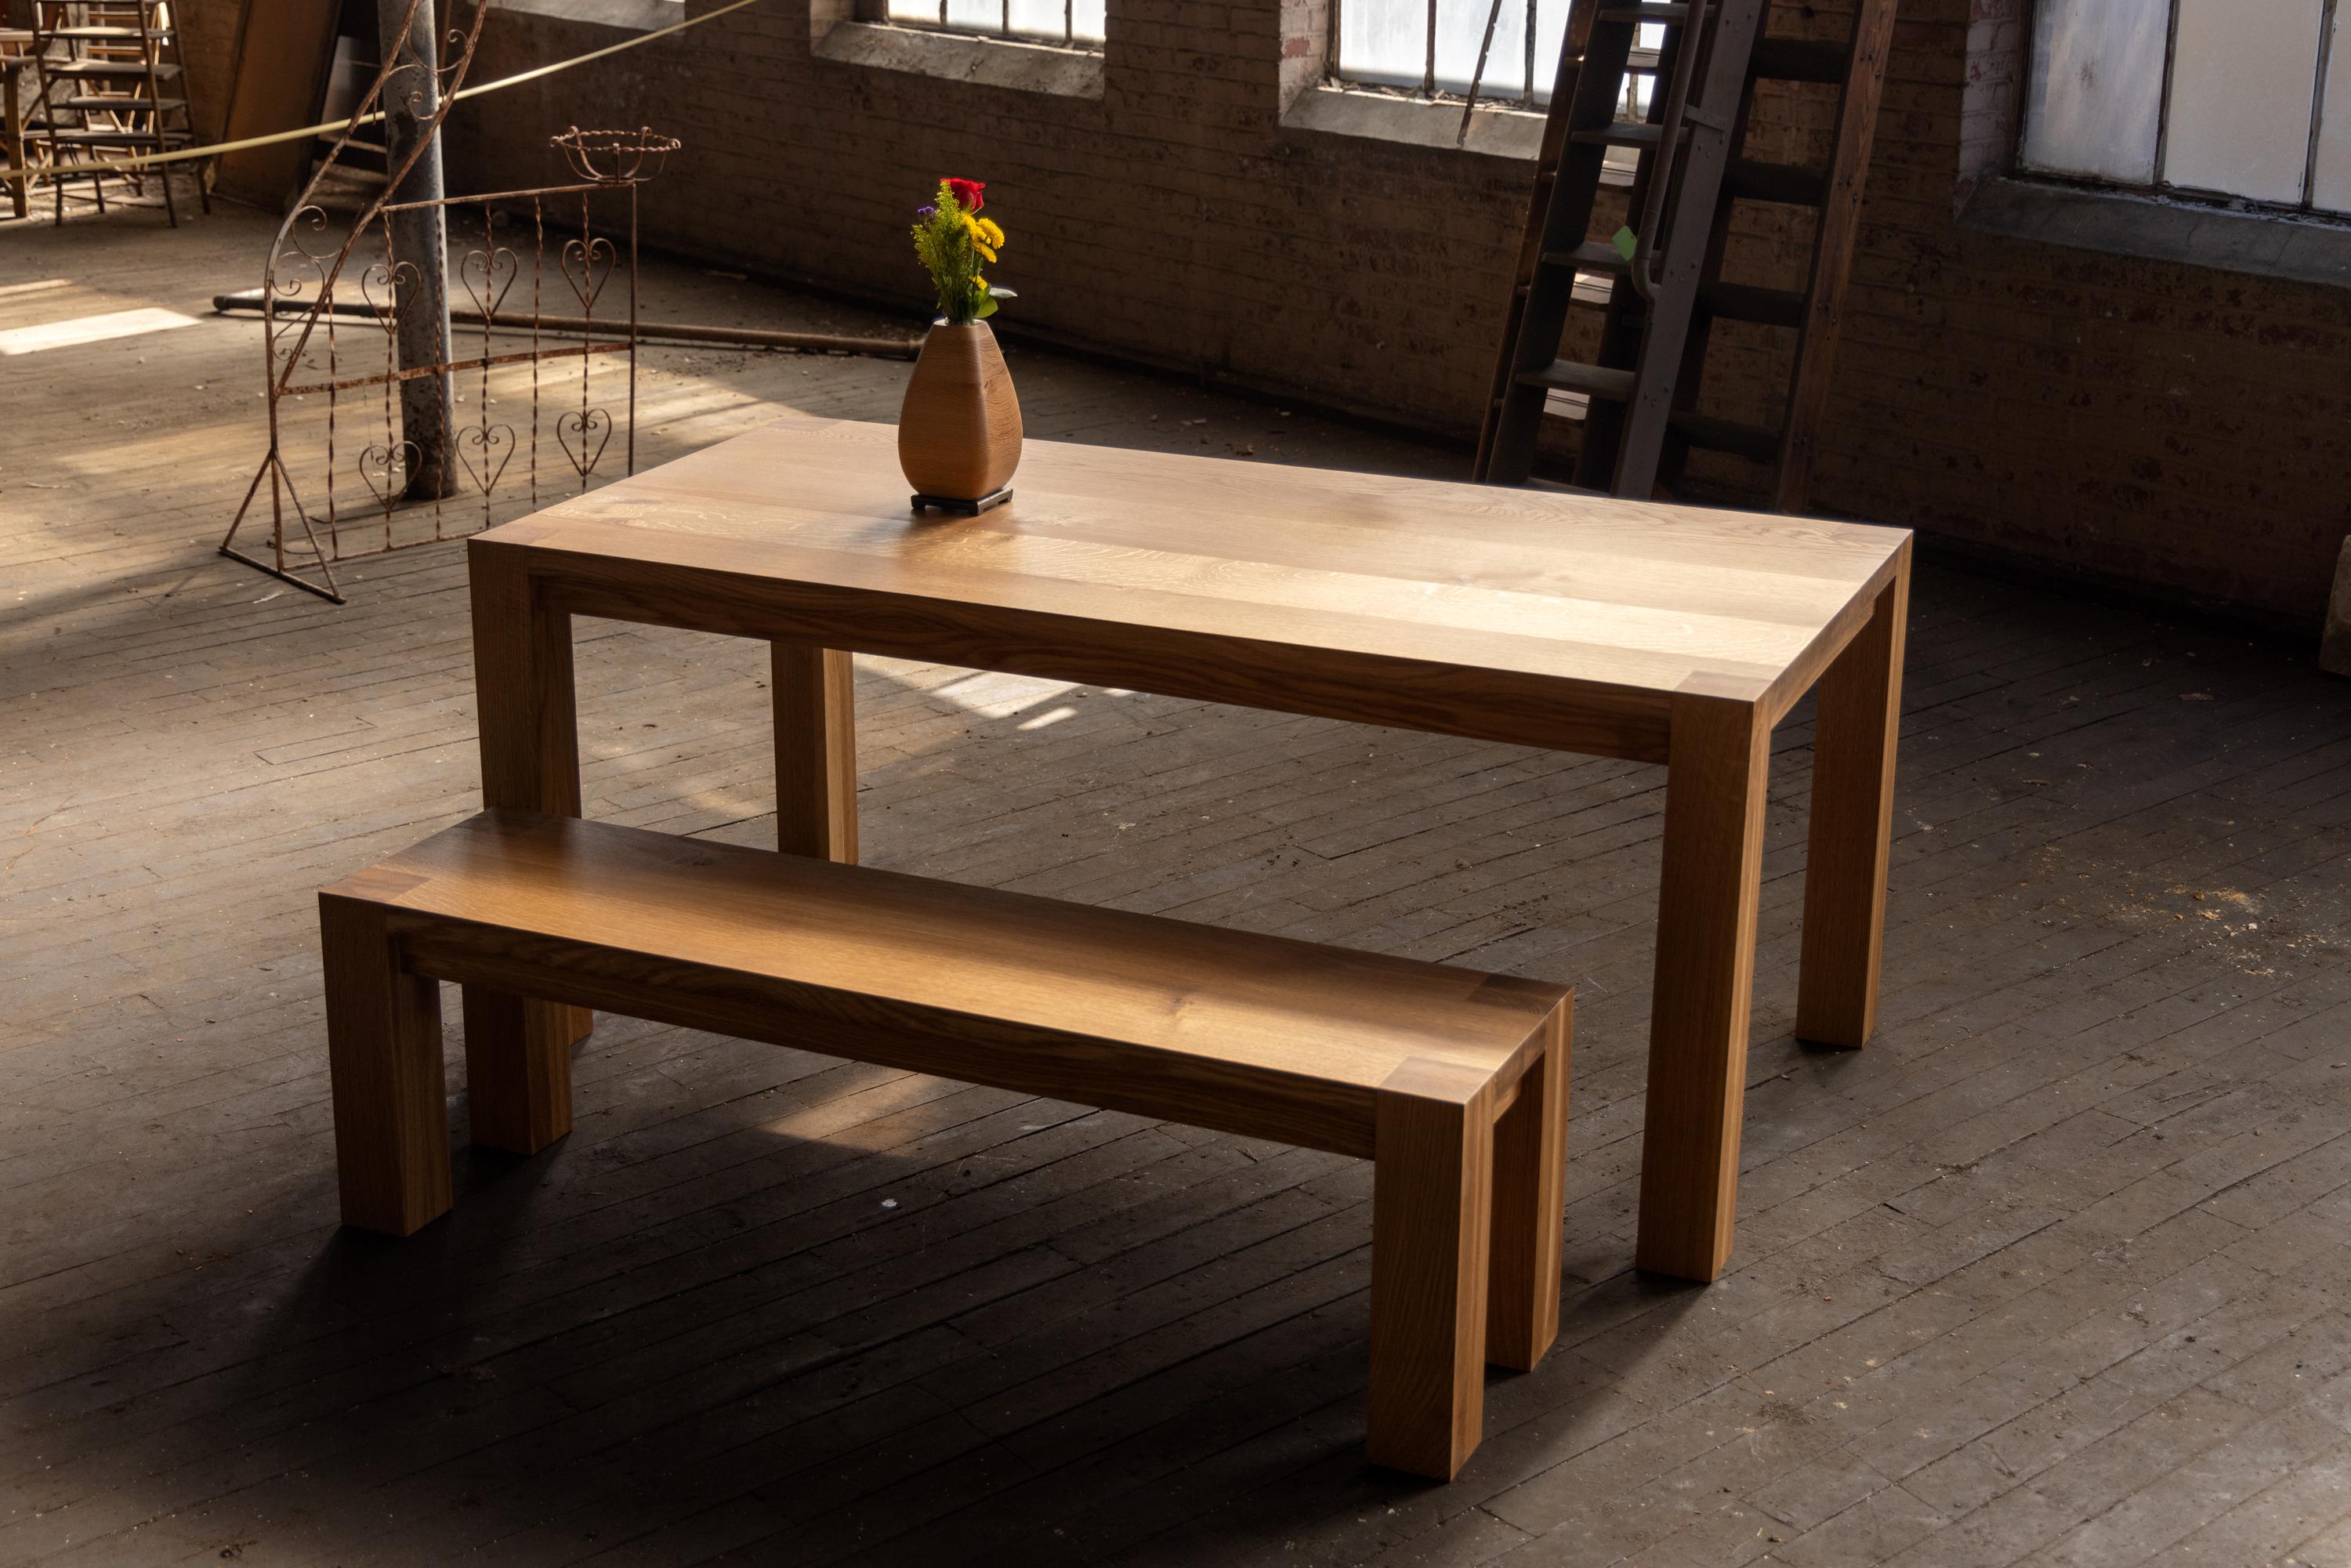 Our parsons table (bench sold separately) is handcrafted of solid urban hardwood. The modern wood dining table has clean lines and functional design. It is crafted with modern lines and traditional joinery. Beautiful Alabama urban hardwoods are